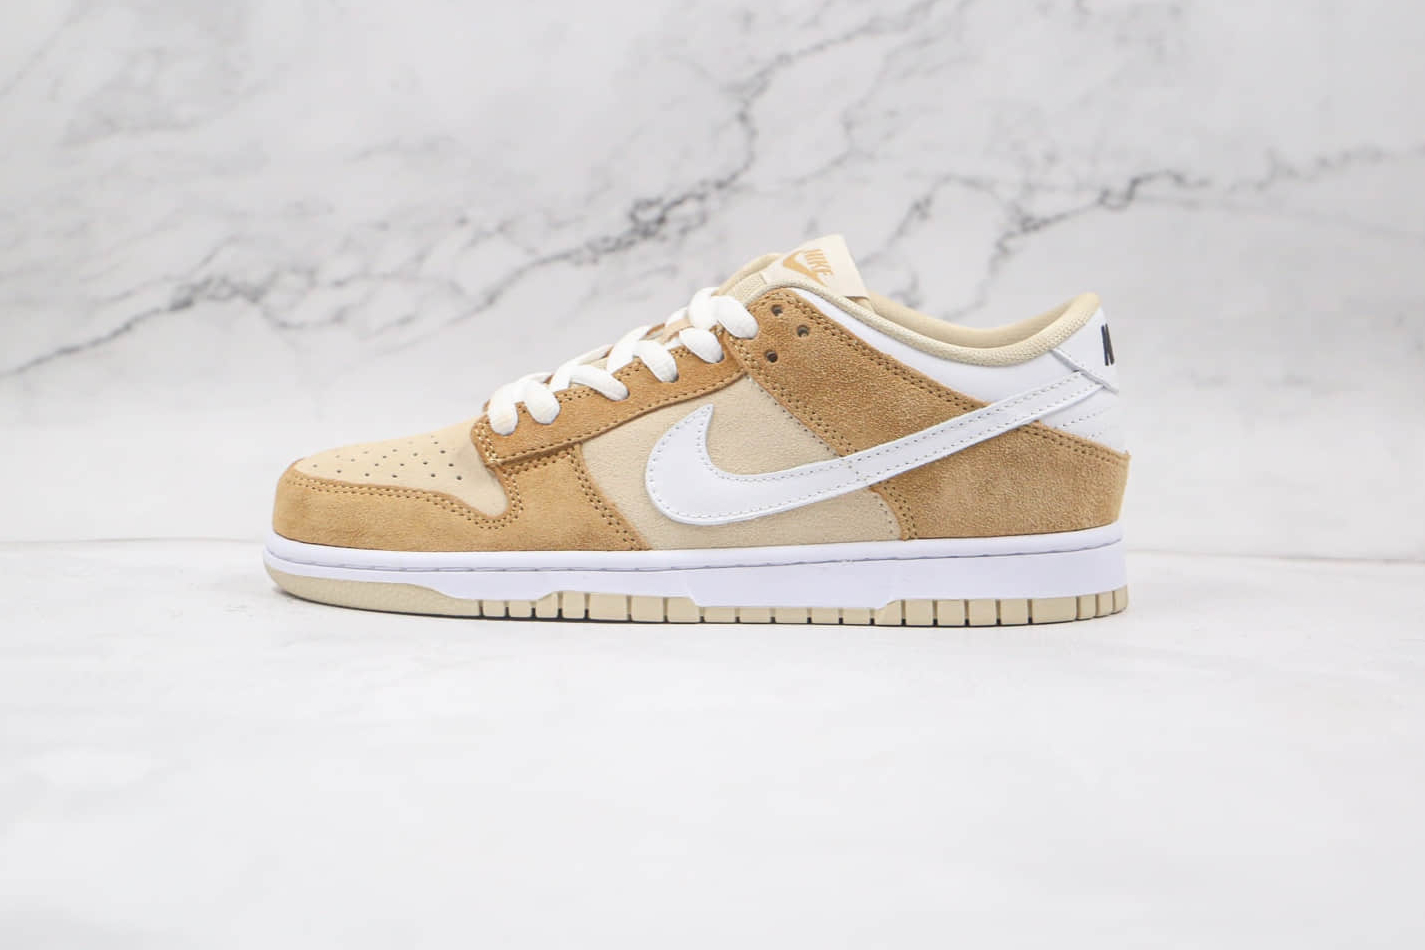 Nike SB Dunk Low PRM White Medium Curry Brown DH7913-002 - Exclusive Stylish Sneakers for Dynamic Comfort!